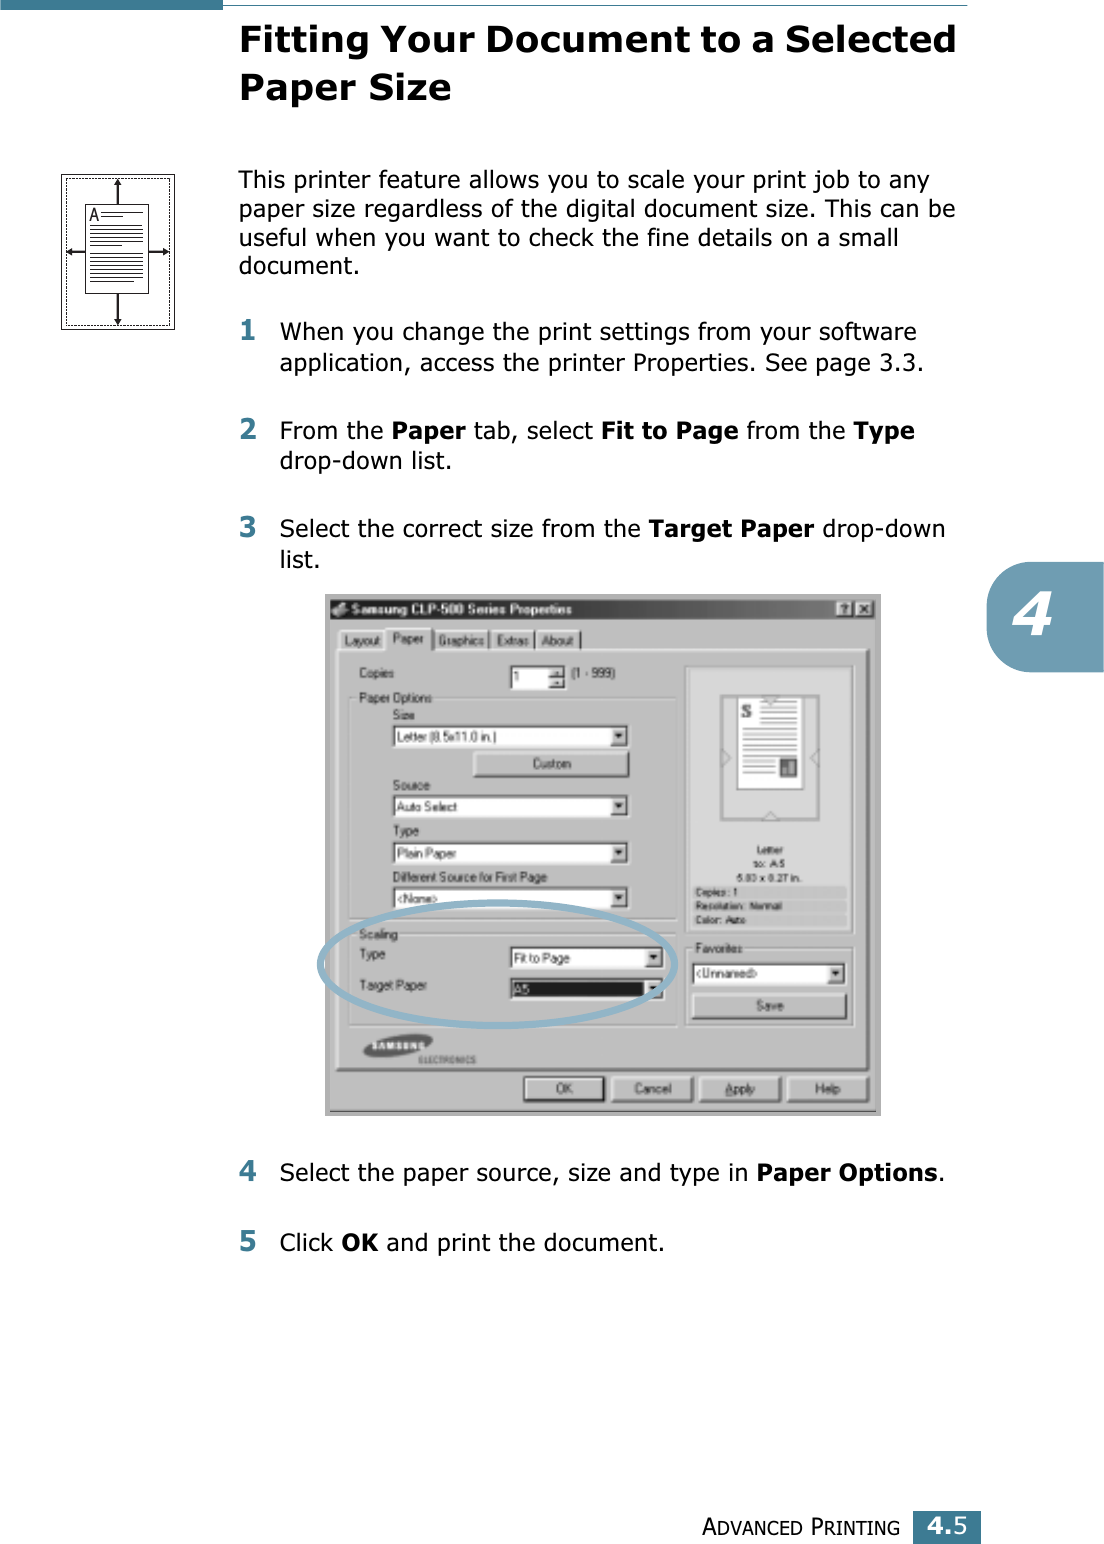 ADVANCED PRINTING4.54Fitting Your Document to a Selected Paper SizeThis printer feature allows you to scale your print job to any paper size regardless of the digital document size. This can be useful when you want to check the fine details on a small document. 1When you change the print settings from your software application, access the printer Properties. See page 3.3.2From the Paper tab, select Fit to Page from the Type drop-down list. 3Select the correct size from the Target Paper drop-down list.4Select the paper source, size and type in Paper Options.5Click OK and print the document. A